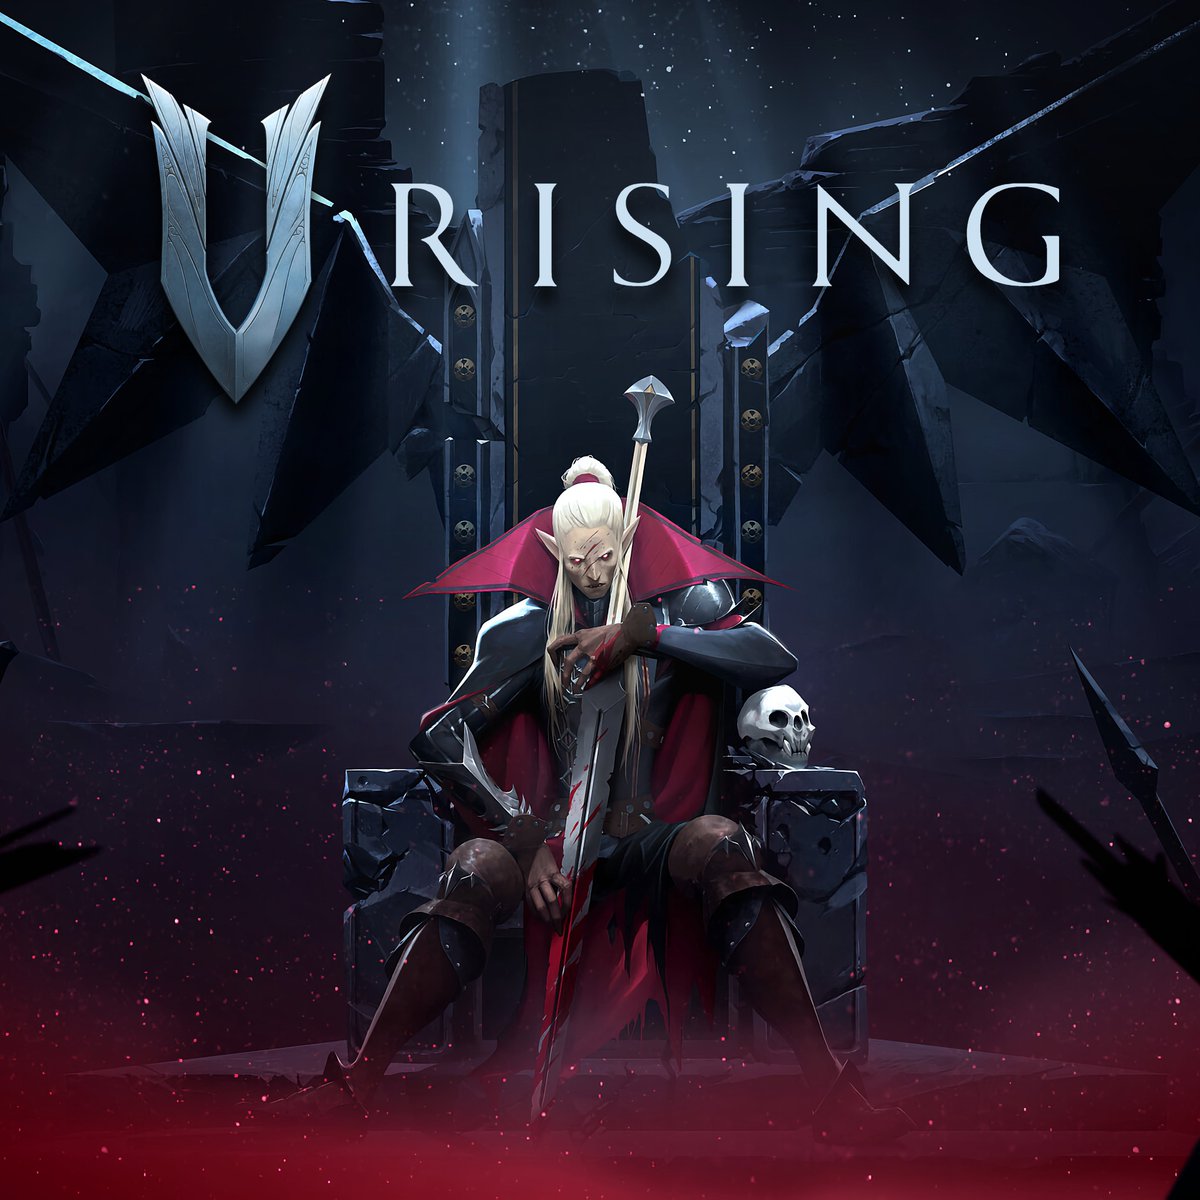 Happy #FreeCodeFriday / #FreeCodeFridayContest

Giveaway for V Rising [Steam]

tinyurl.com/2cyzydw3
Instructions on the gleam widget! Also bonus entry for watching livestreams on twitch! #Win #WinItWeds #XboxFreeCodeFriday #FridayFeeling #Steam #Giveaway #VRising